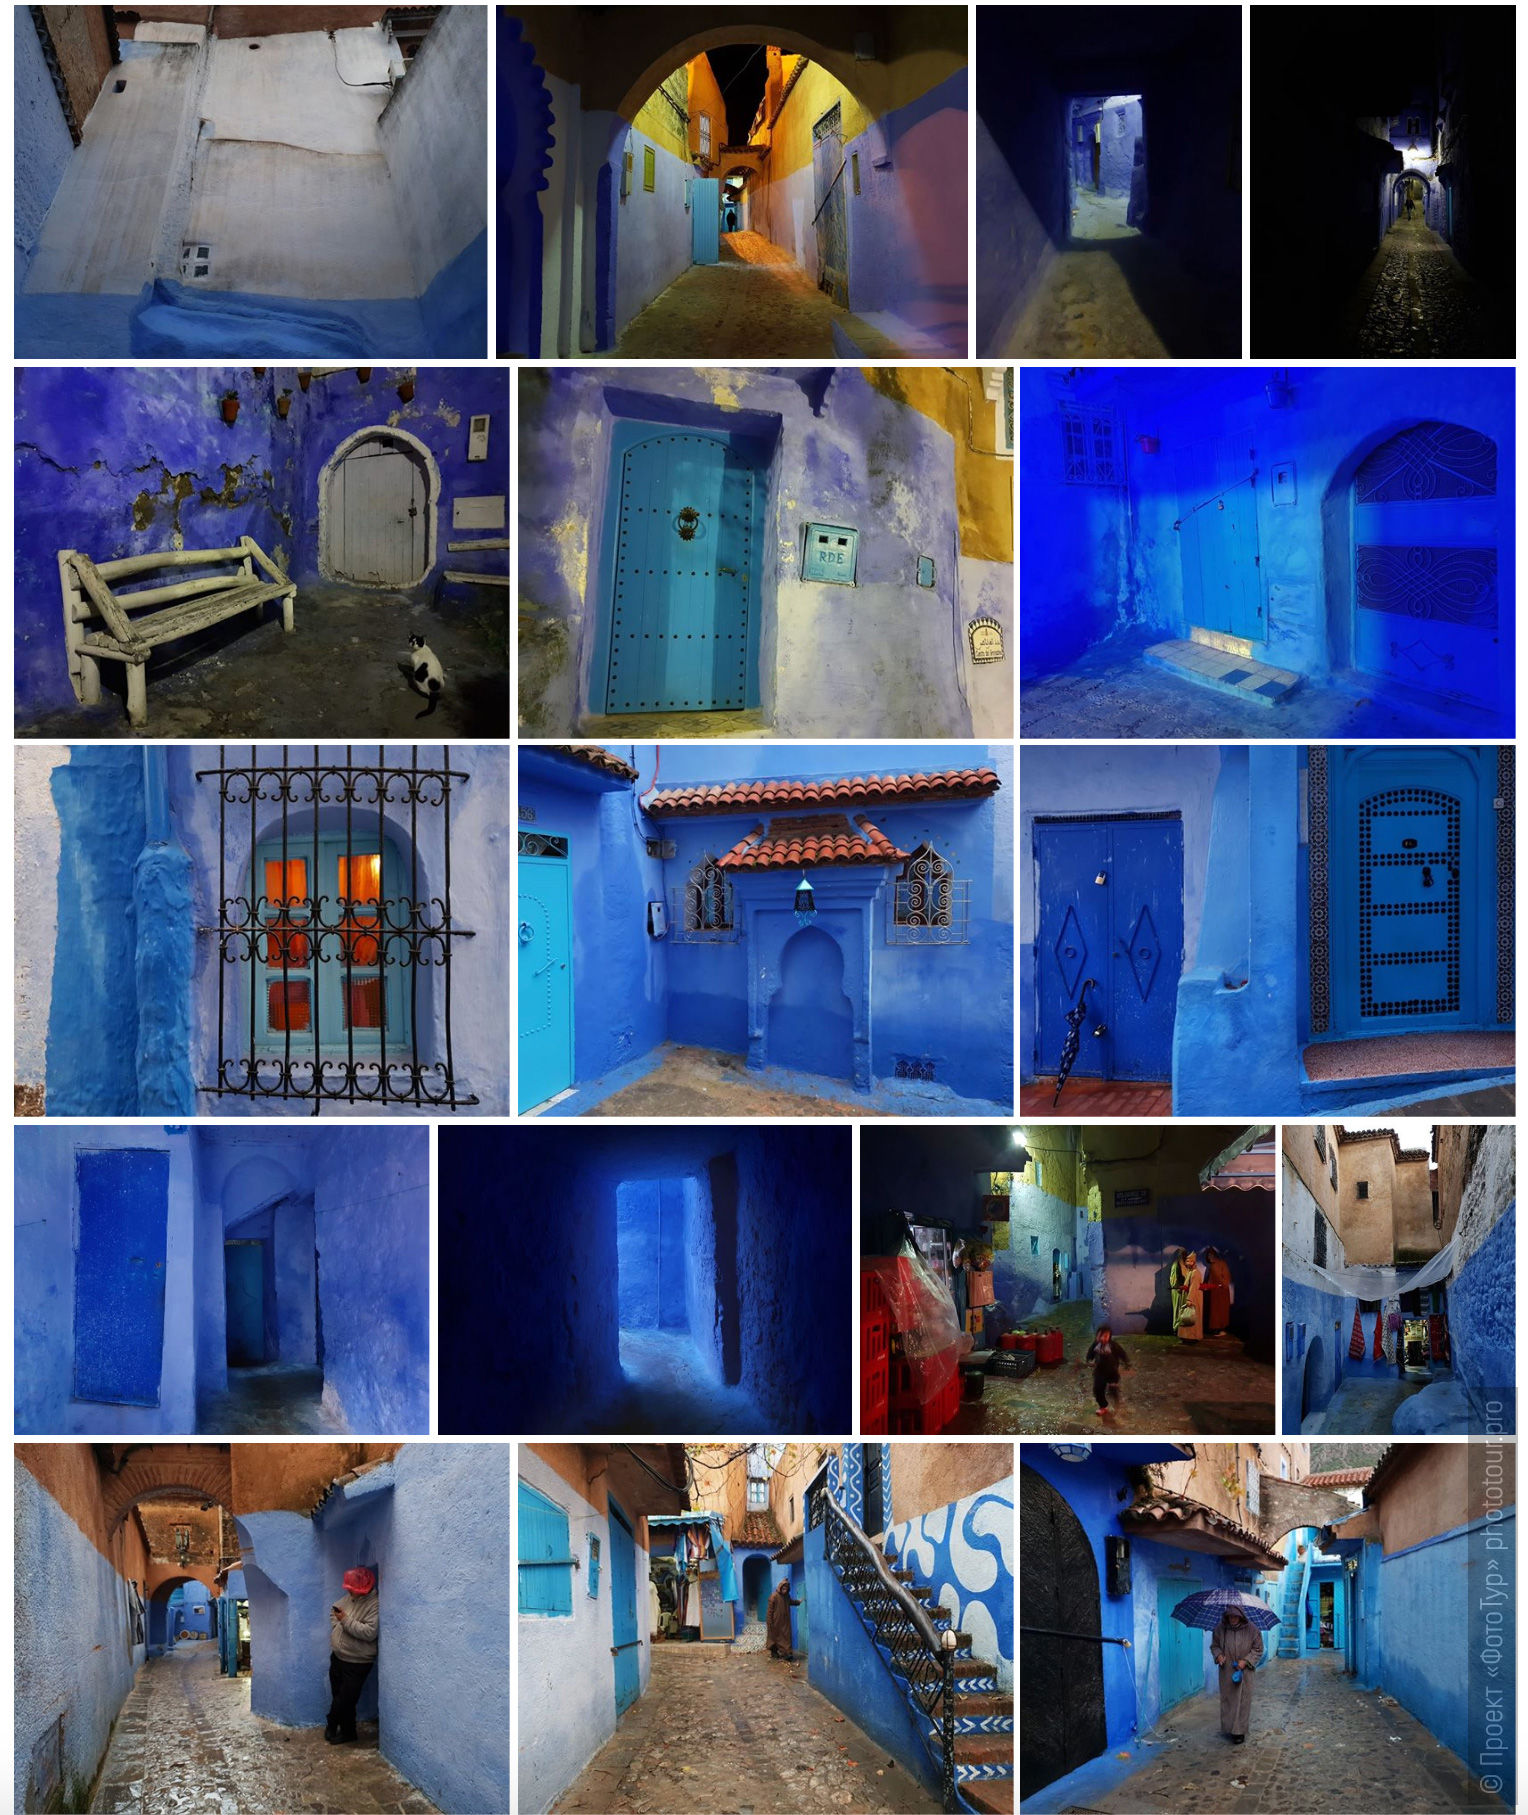 The blue city of Morocco is Chefchaouen. Adventure photo tour: medina, cascades, sands and ports of Morocco, April 4 - 17, 2020.